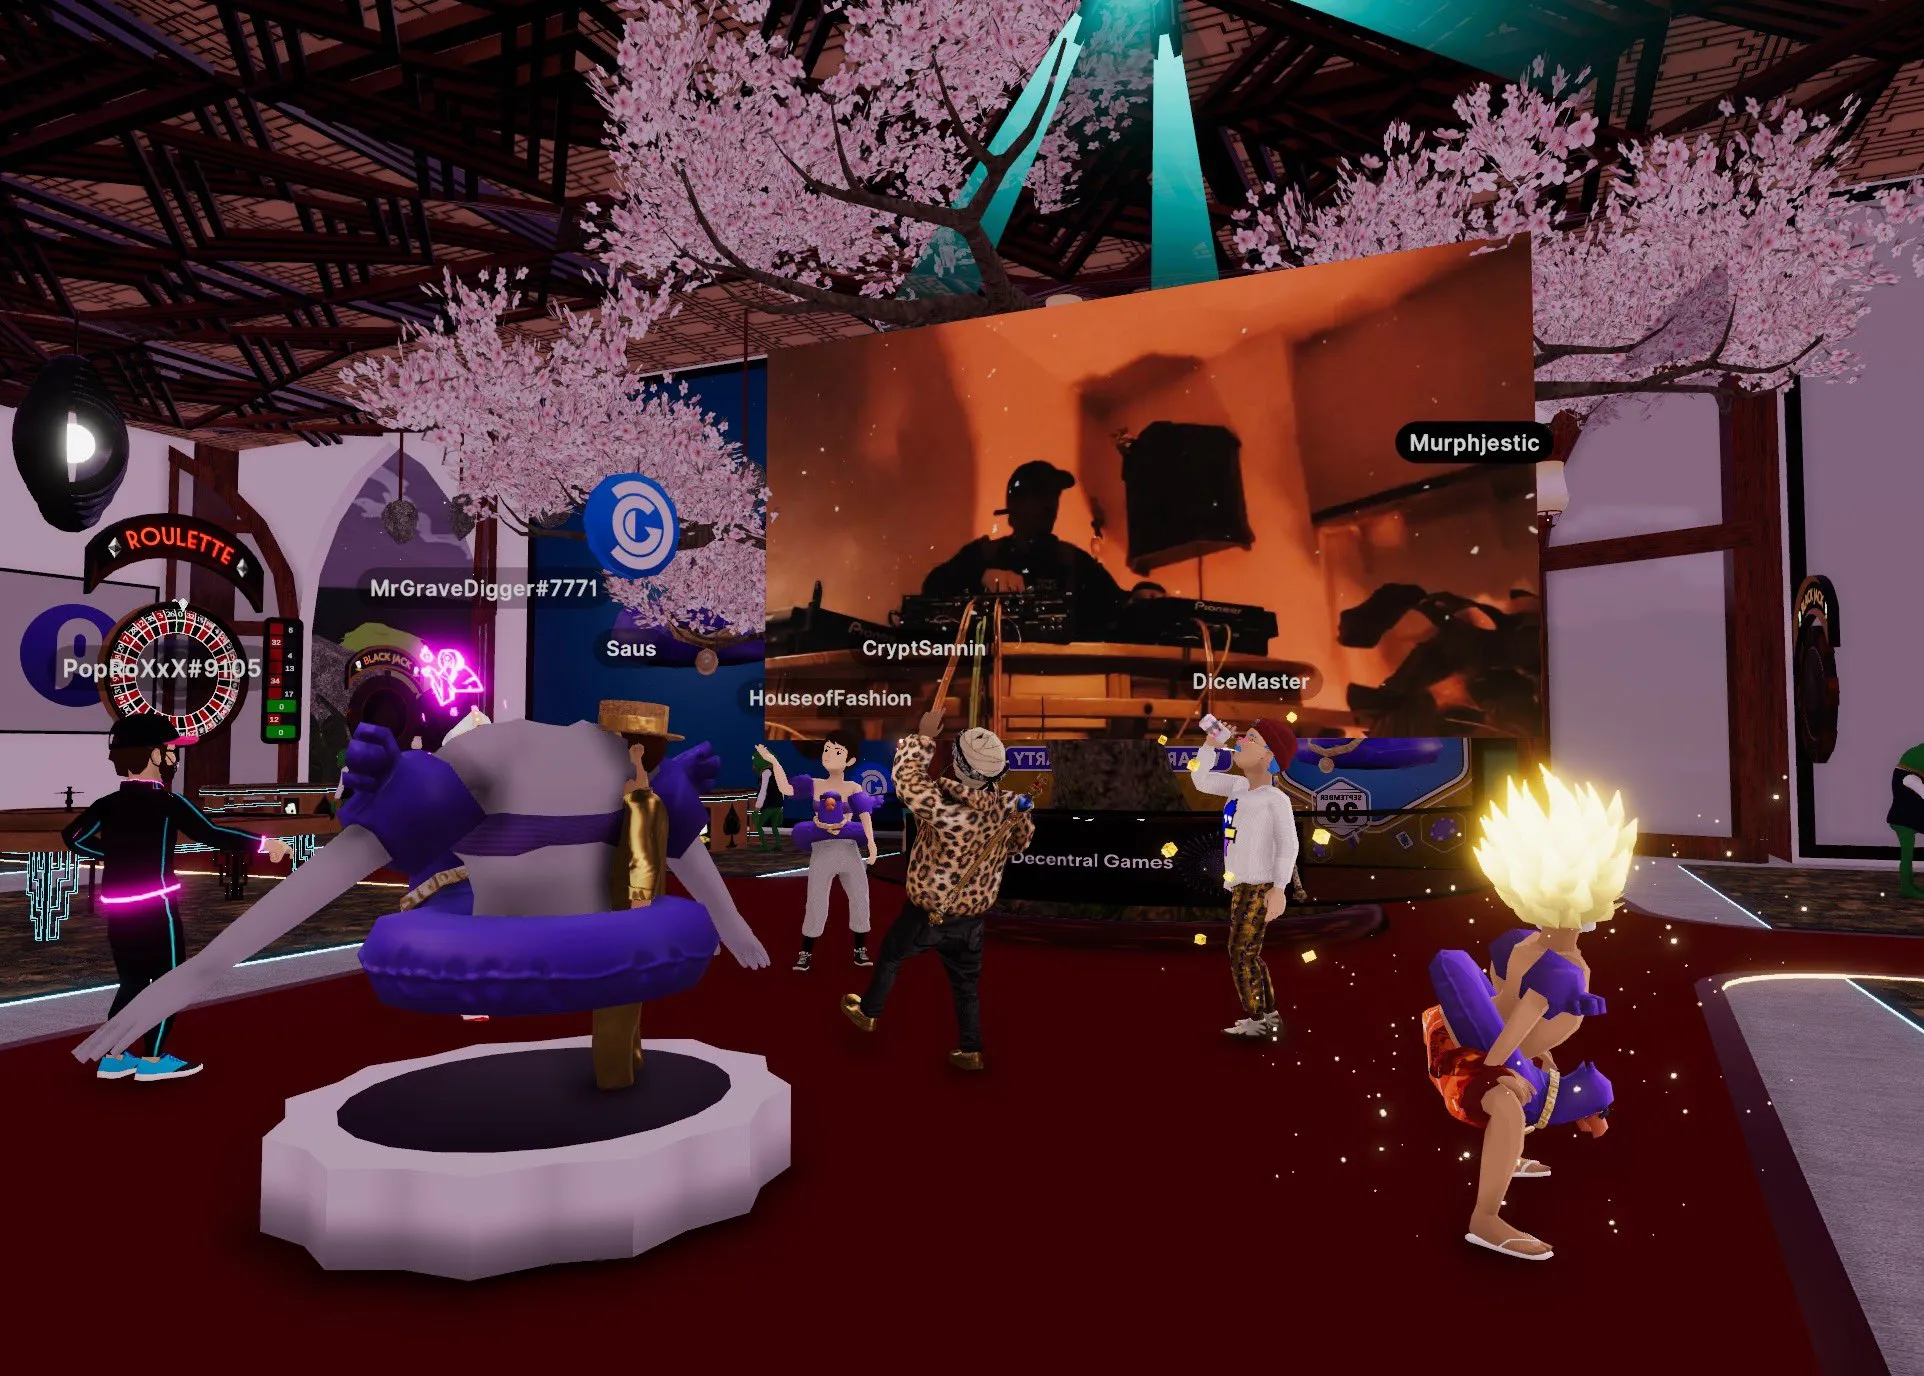 The screenshot showcases a game scene within Decentral Games, where players can experience the excitement of playing real-life poker in a virtual world.